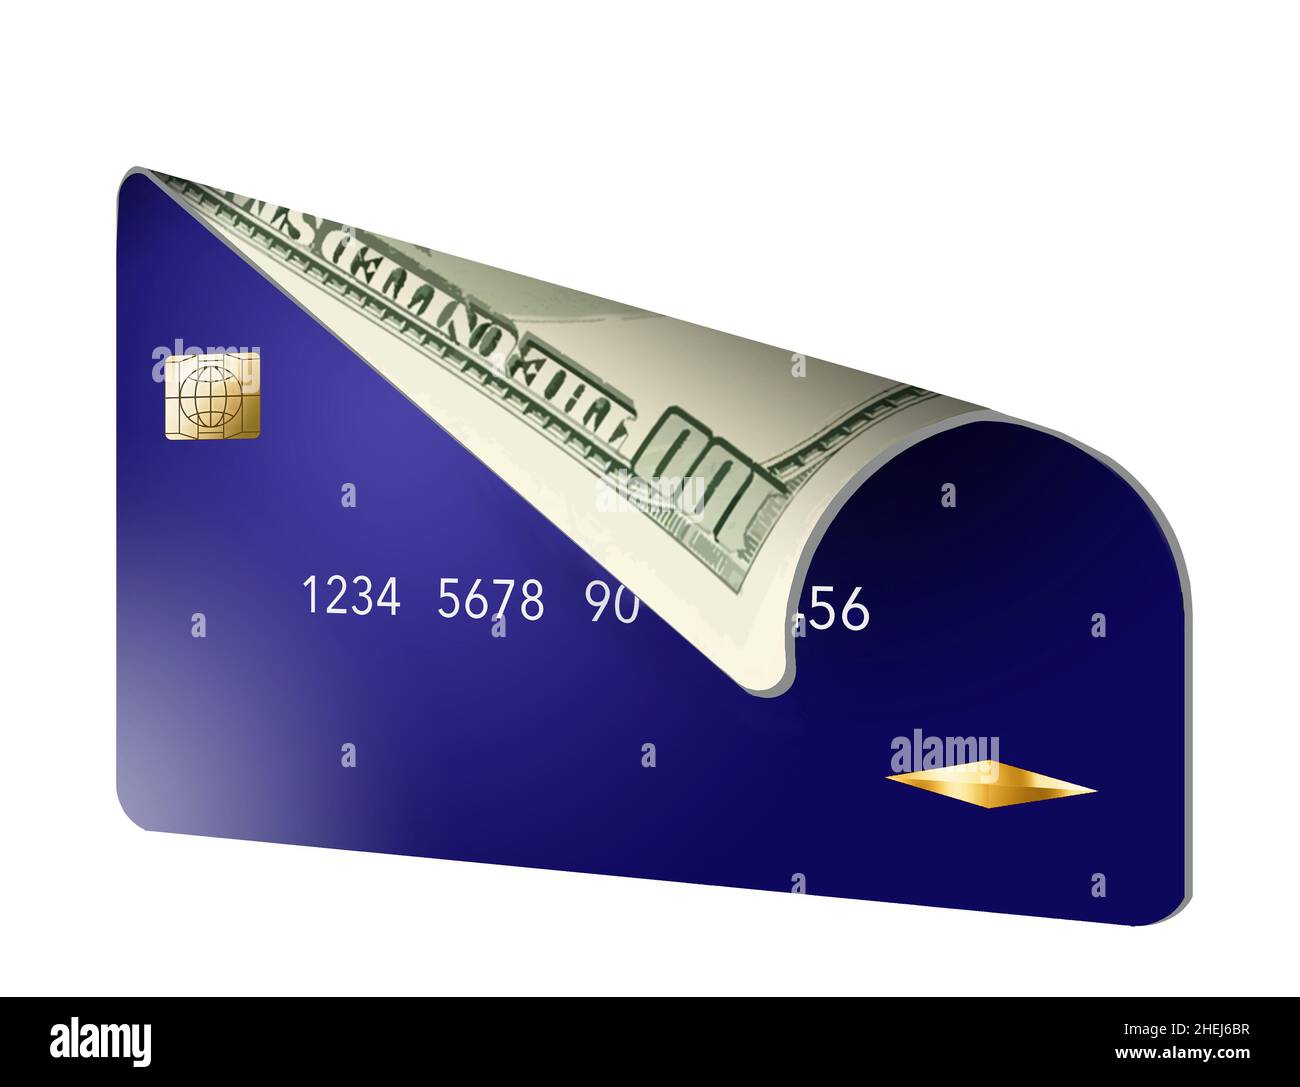 A generic credit card is curled over at the corner to reveal the back side is a 100 dollar bill in this 3-d illustration about carrying a card or carr Stock Photo